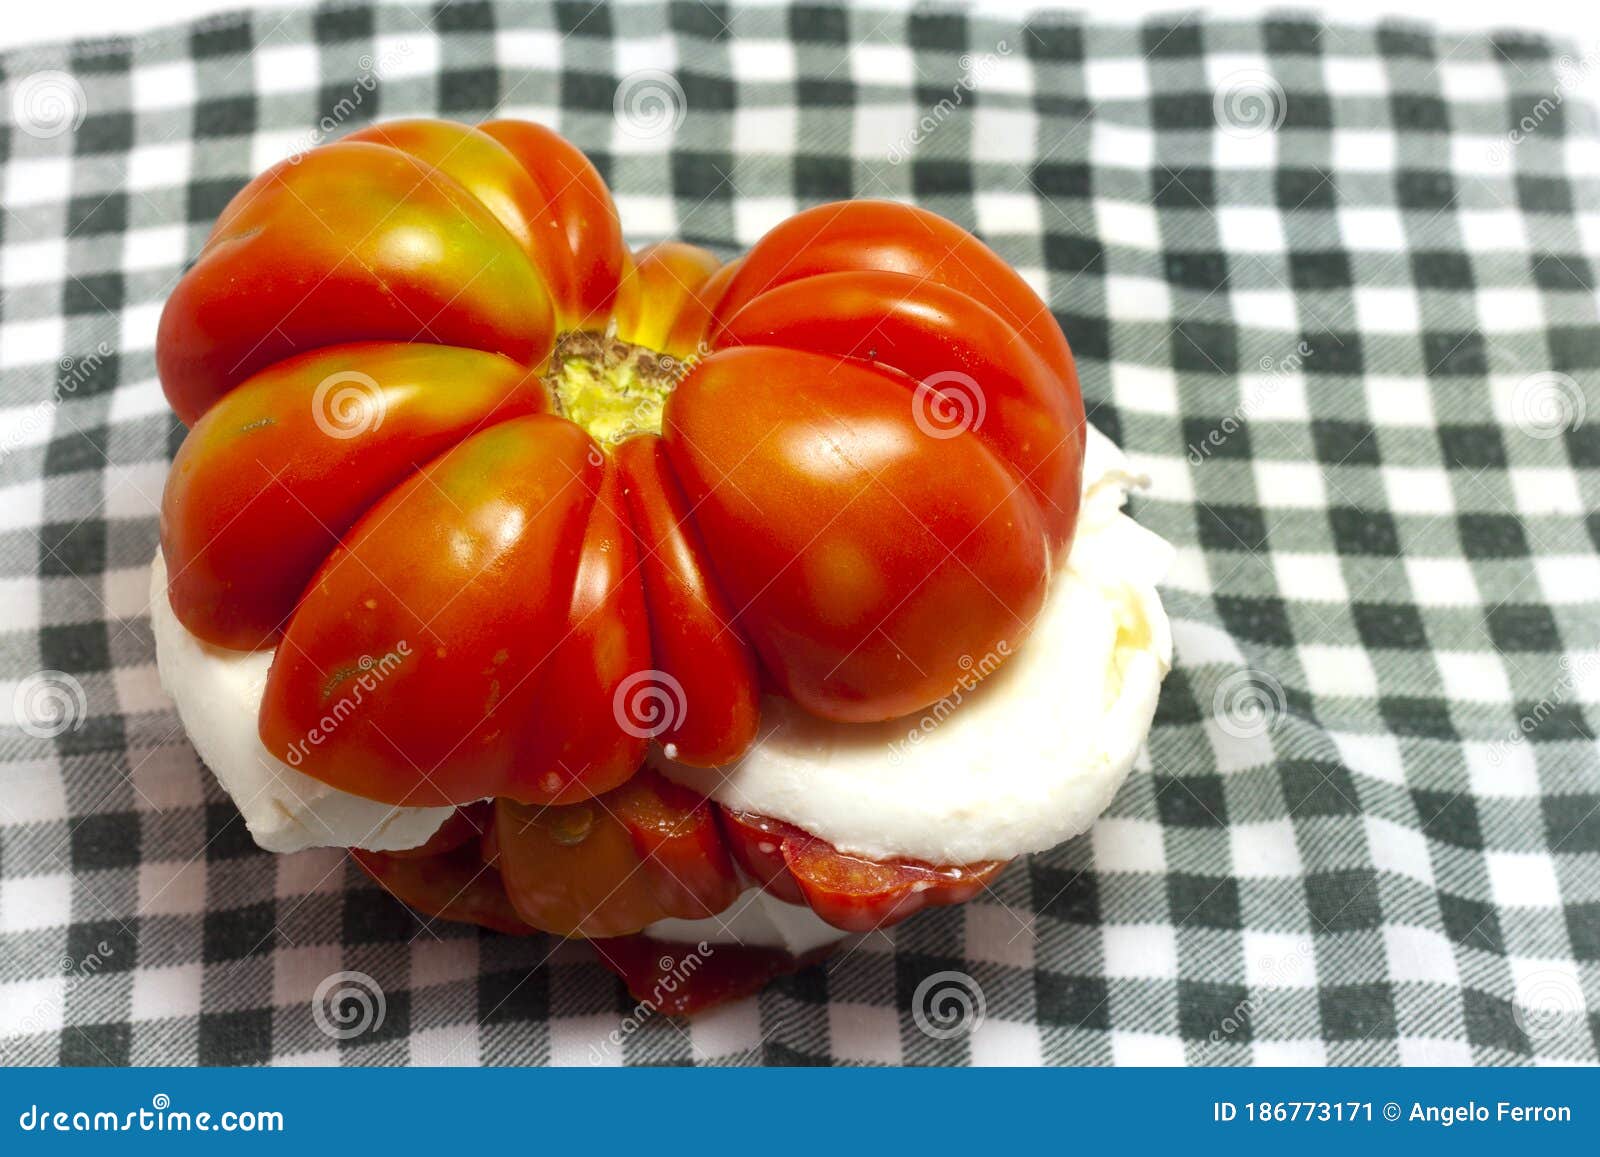 red tomato from salad cut with mozzarella